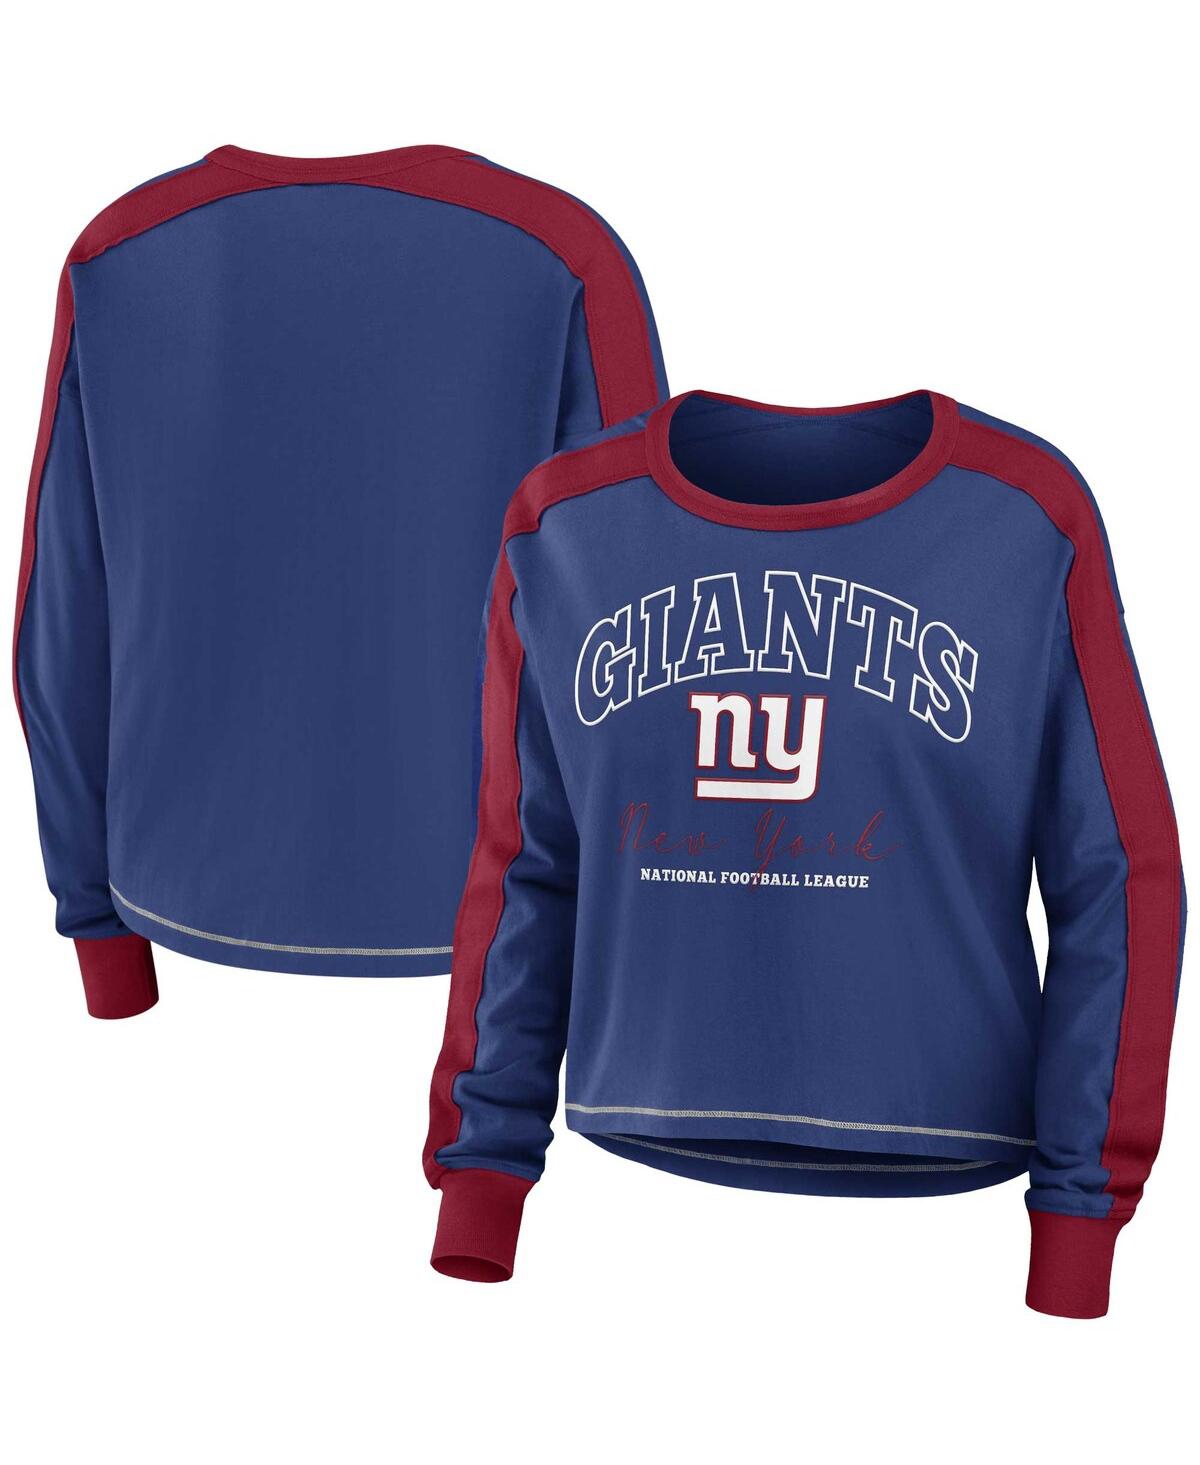 Women's Wear by Erin Andrews Royal, Red New York Giants Color Block Modest Crop Long Sleeve T-shirt - Royal, Red